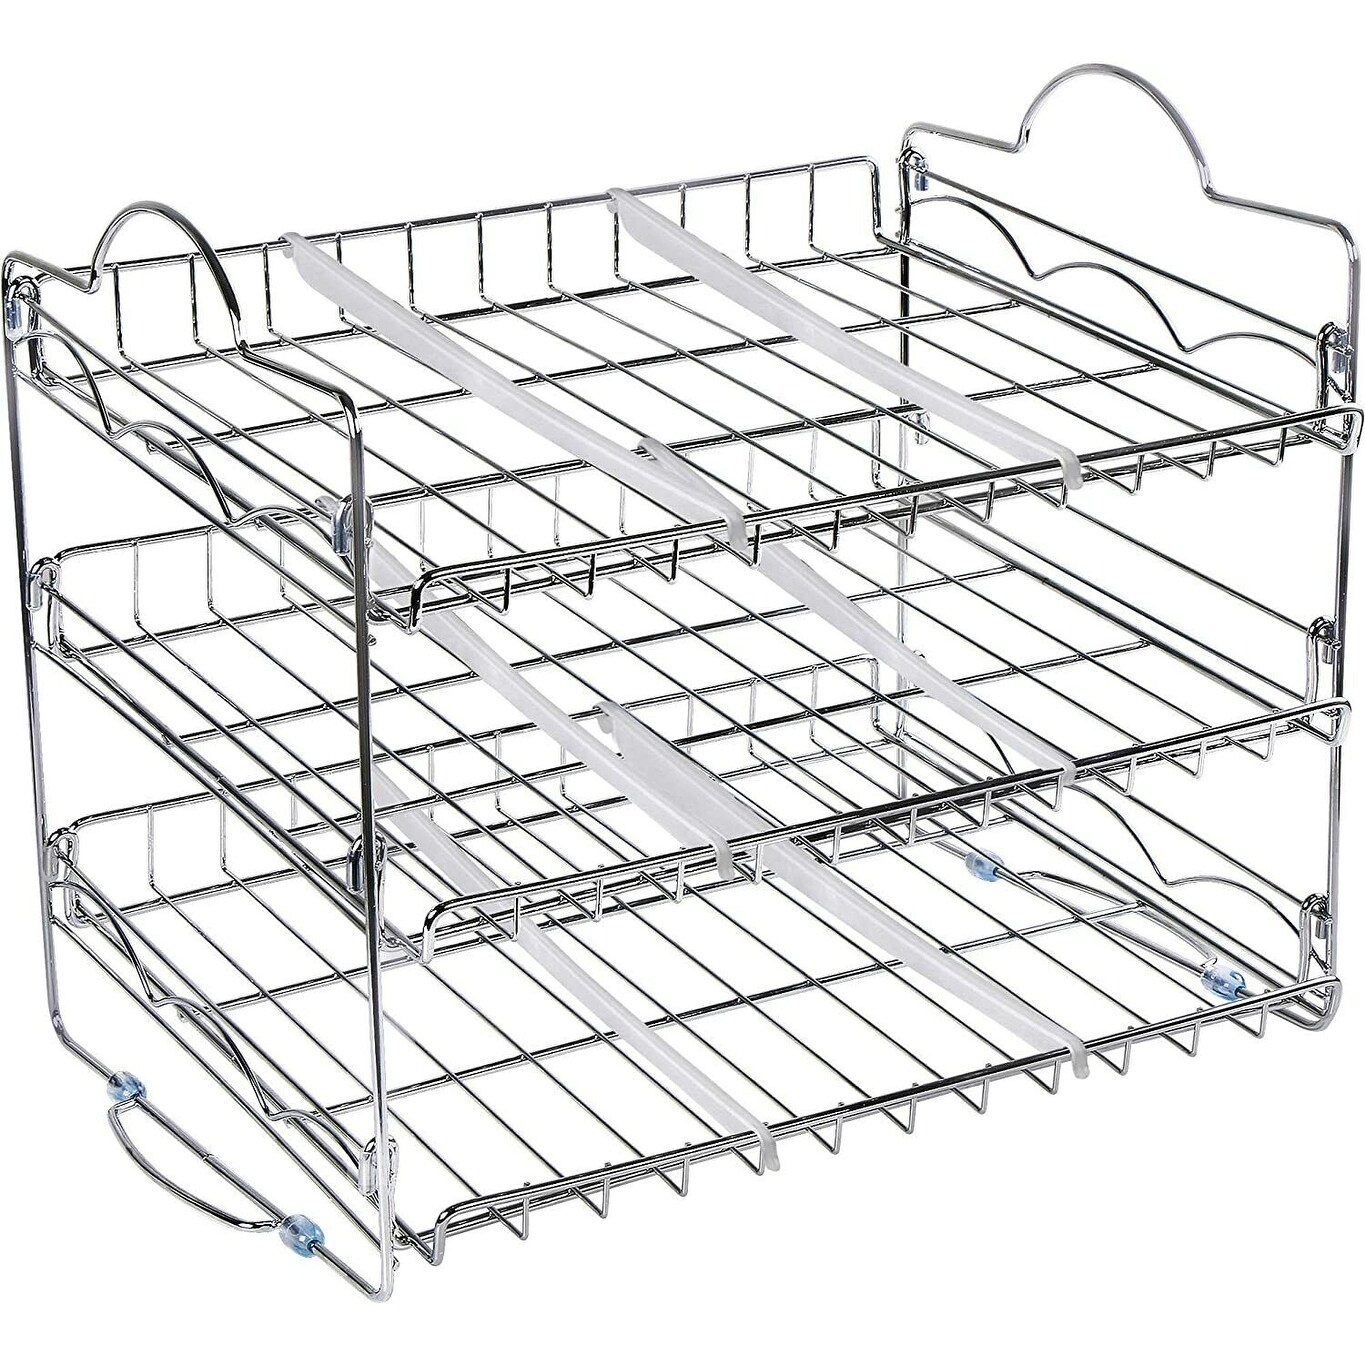 https://ak1.ostkcdn.com/images/products/is/images/direct/140af9e62db89a9e62b41c8ac979560a52e3c2b9/Kitchen-Can-Rack-Organizer-Stackable-Can-Organizer-Holds-Up-to-36-Cans.jpg